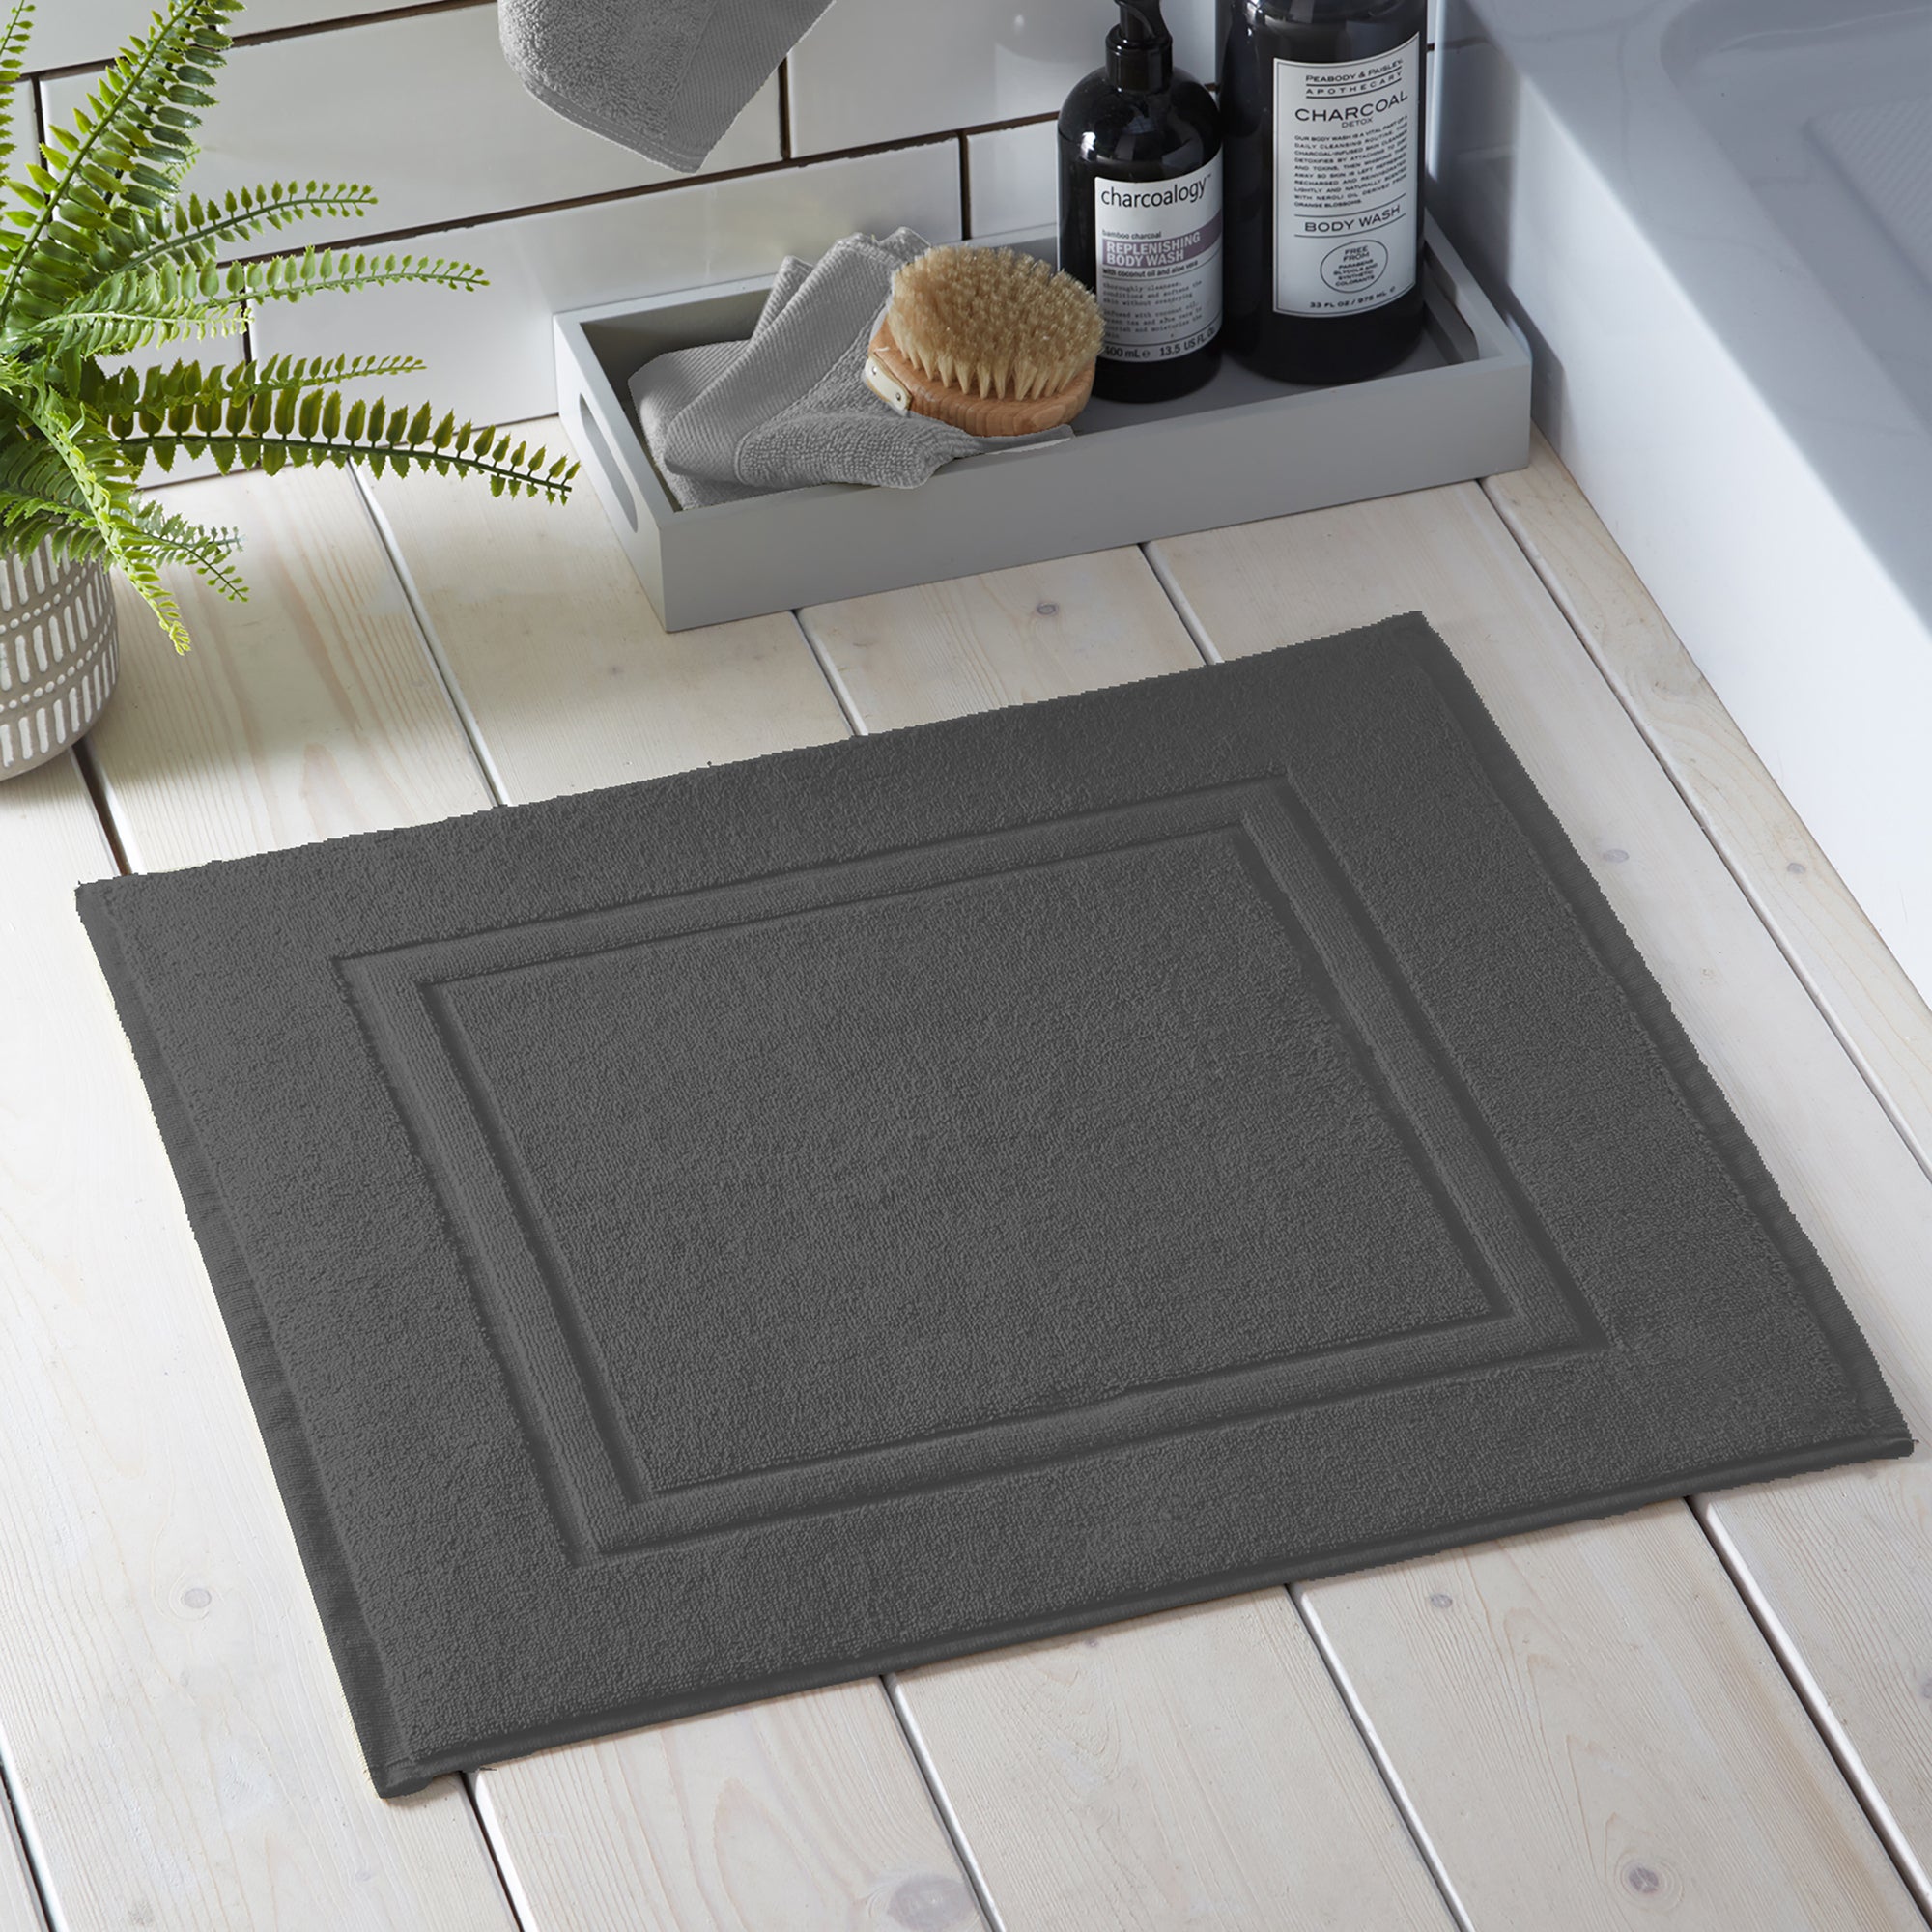 Shower Mat Abode Eco by Drift Home in Charcoal